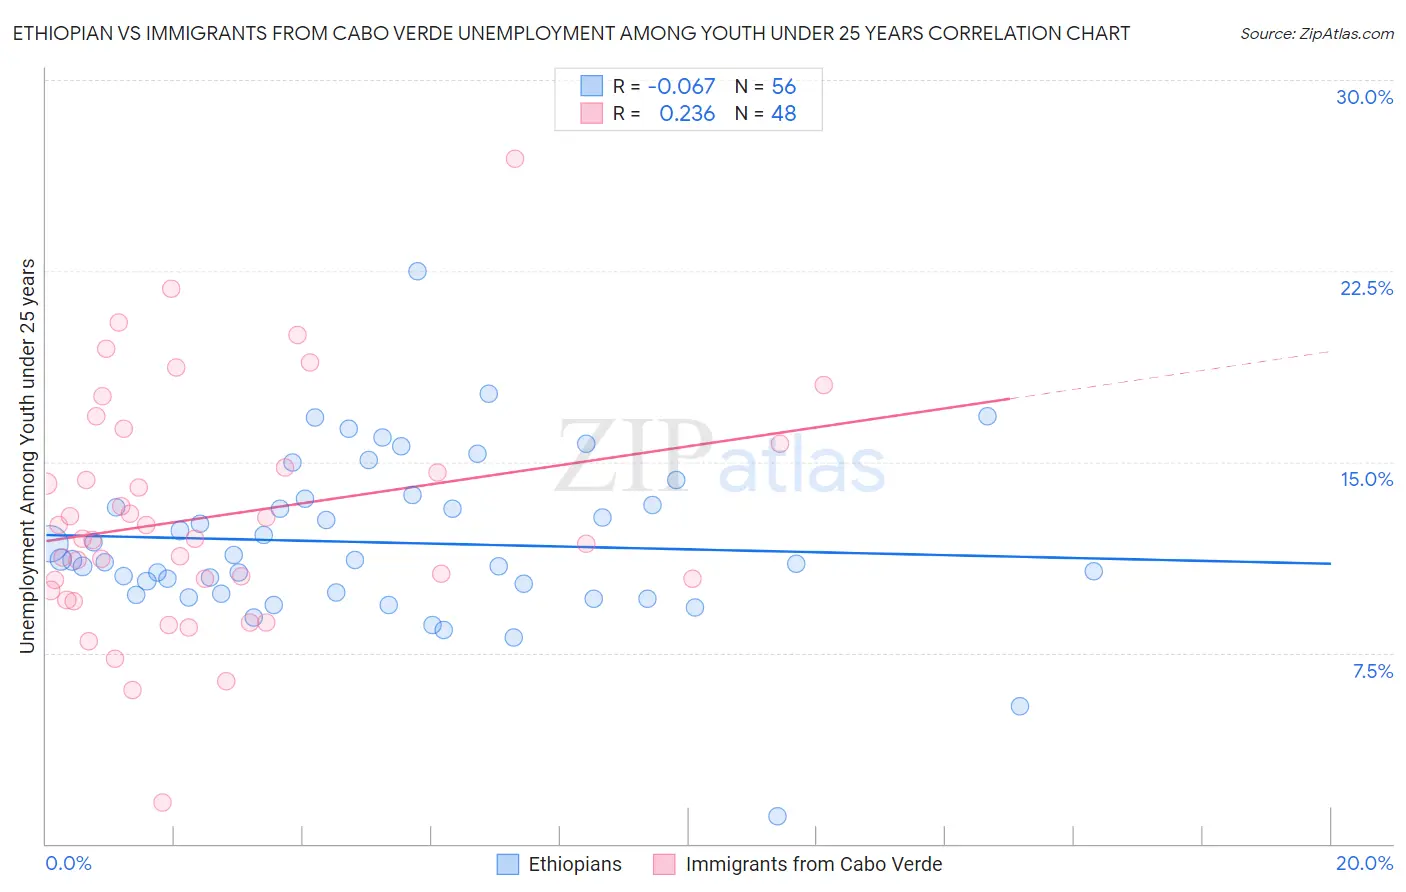 Ethiopian vs Immigrants from Cabo Verde Unemployment Among Youth under 25 years